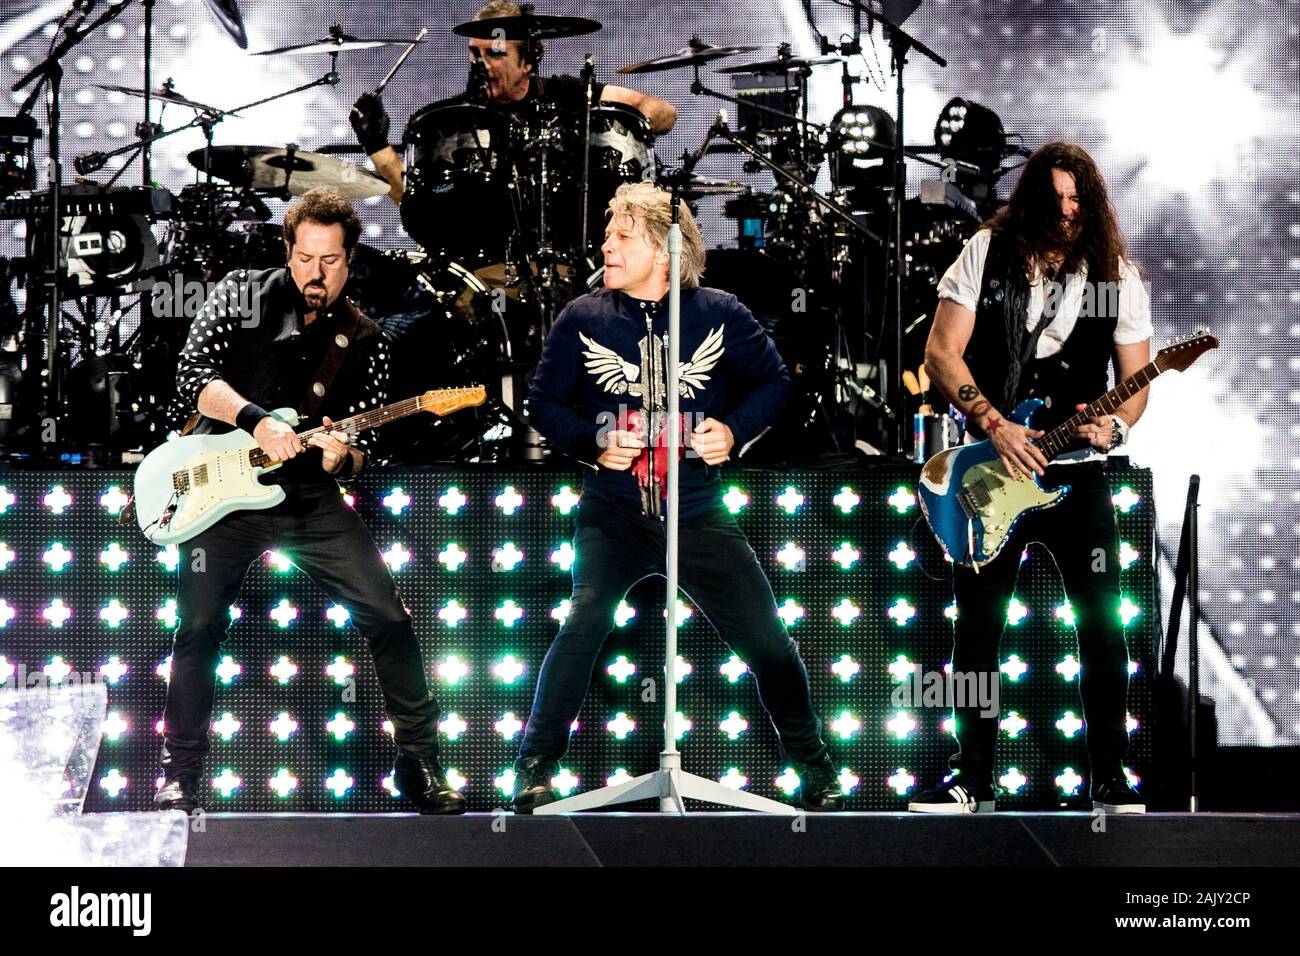 Soenderborg, Denmark. 11th, June 2019. The American rock band Bon Jovi performs a live concert at Slagmarken in Soenderborg. Here singer and musician Jon Bon Jovi is seen live on stage with guitarists John Shanks (L) and Phil X (R). (Photo credit: Gonzales Photo - Lasse Lagoni). Stock Photo